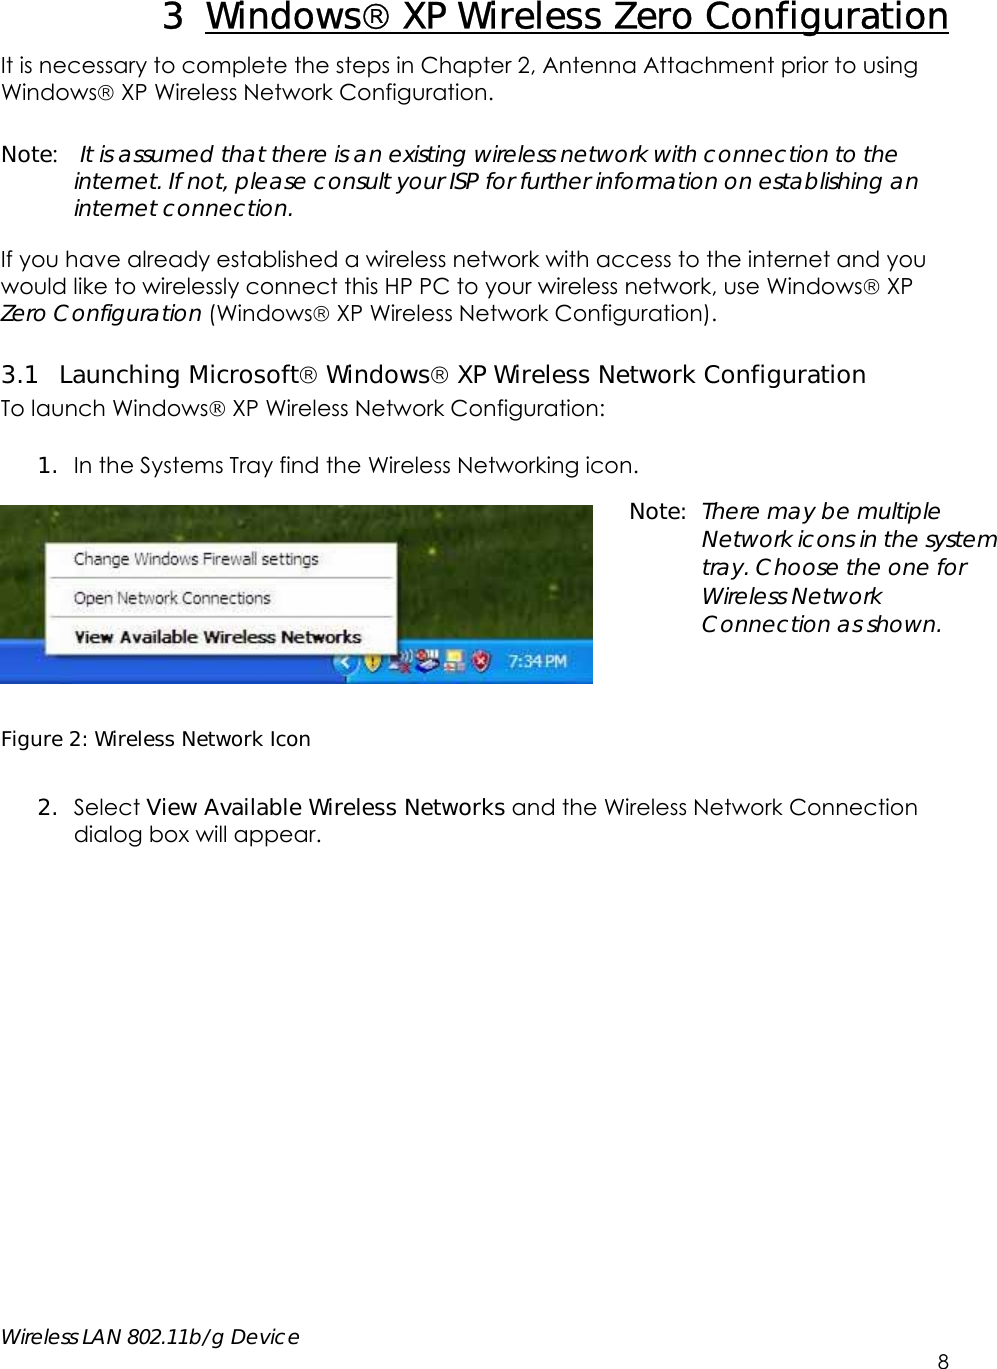     Wireless LAN 802.11b/g Device        8 3 Windows XP Wireless Zero Configuration It is necessary to complete the steps in Chapter 2, Antenna Attachment prior to using Windows XP Wireless Network Configuration.  Note:  It is assumed that there is an existing wireless network with connection to the internet. If not, please consult your ISP for further information on establishing an internet connection.  If you have already established a wireless network with access to the internet and you would like to wirelessly connect this HP PC to your wireless network, use Windows XP Zero Configuration (Windows XP Wireless Network Configuration). 3.1 Launching Microsoft Windows XP Wireless Network Configuration  To launch Windows XP Wireless Network Configuration:  1. In the Systems Tray find the Wireless Networking icon.    Figure 2: Wireless Network Icon  2. Select View Available Wireless Networks and the Wireless Network Connection dialog box will appear.   Note: There may be multiple Network icons in the system tray. Choose the one for Wireless Network Connection as shown. 